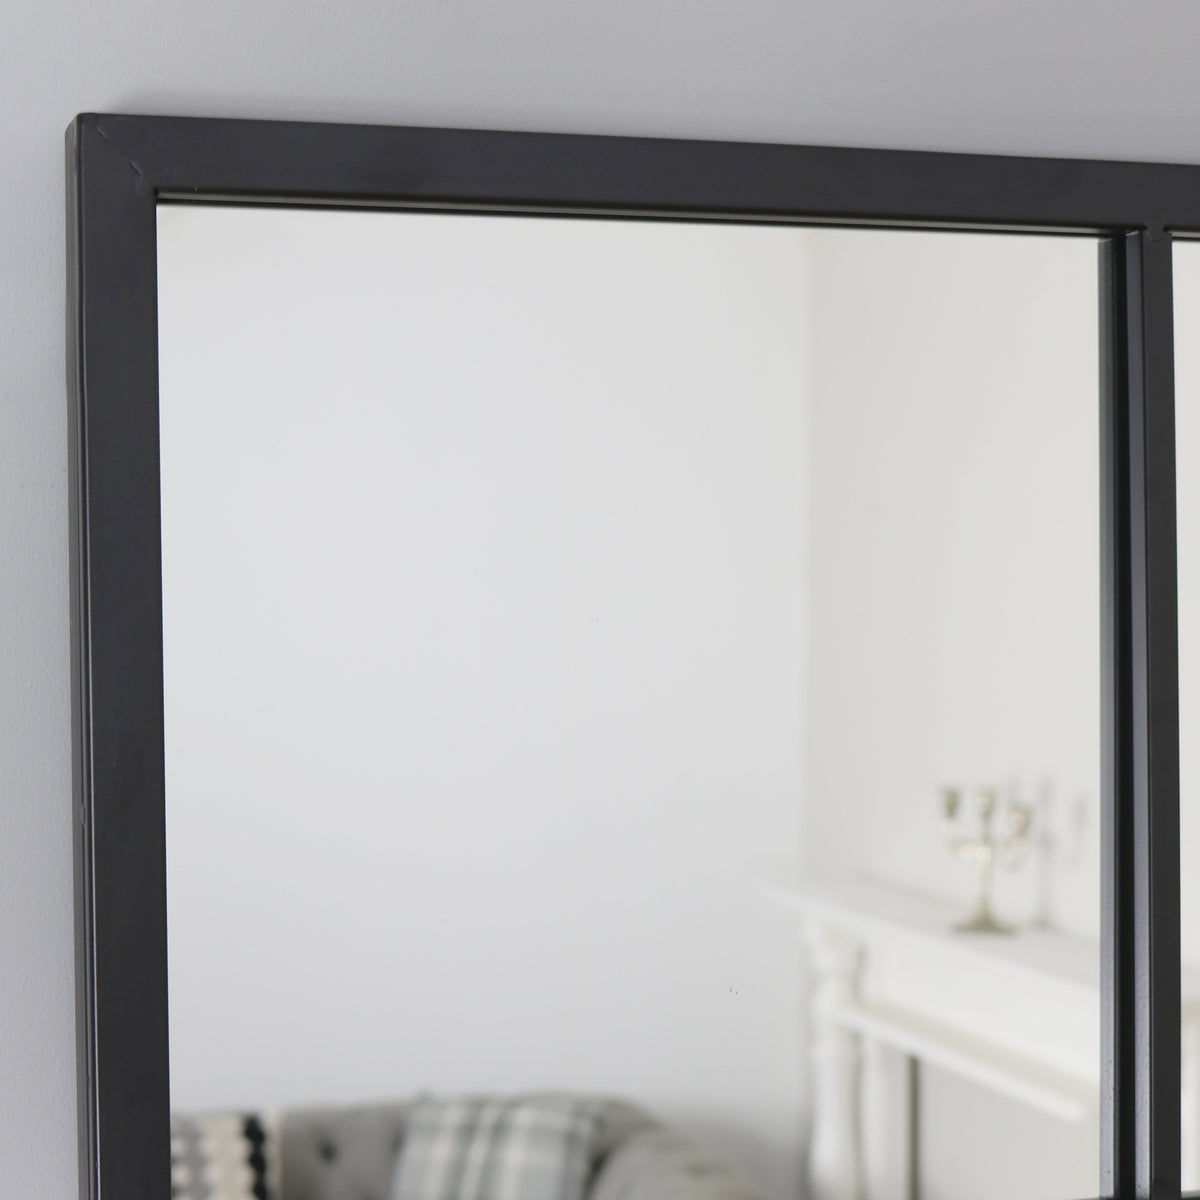 A detail of this mirrors stylish frame.